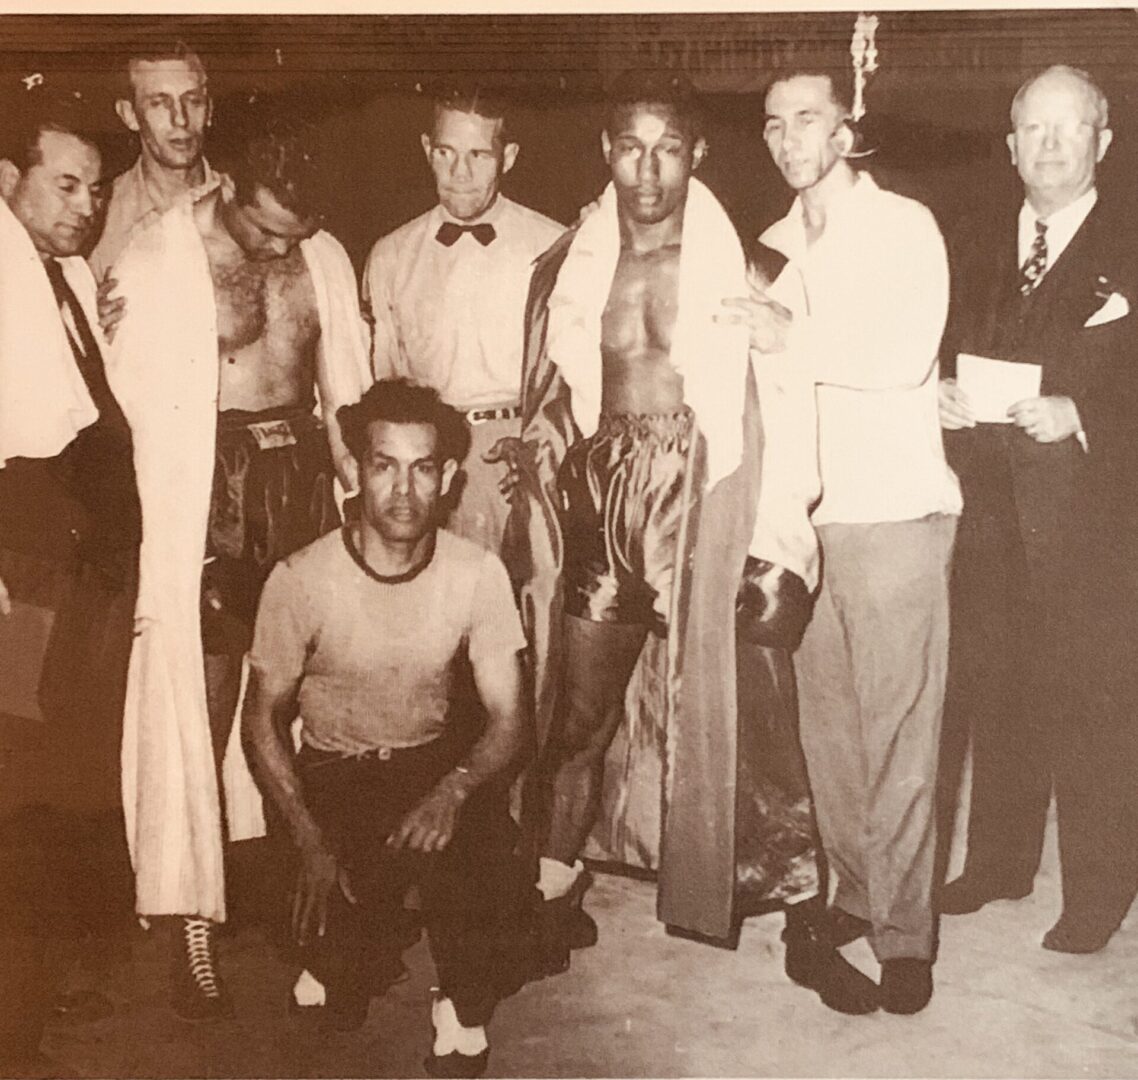 A group of men standing next to each other.